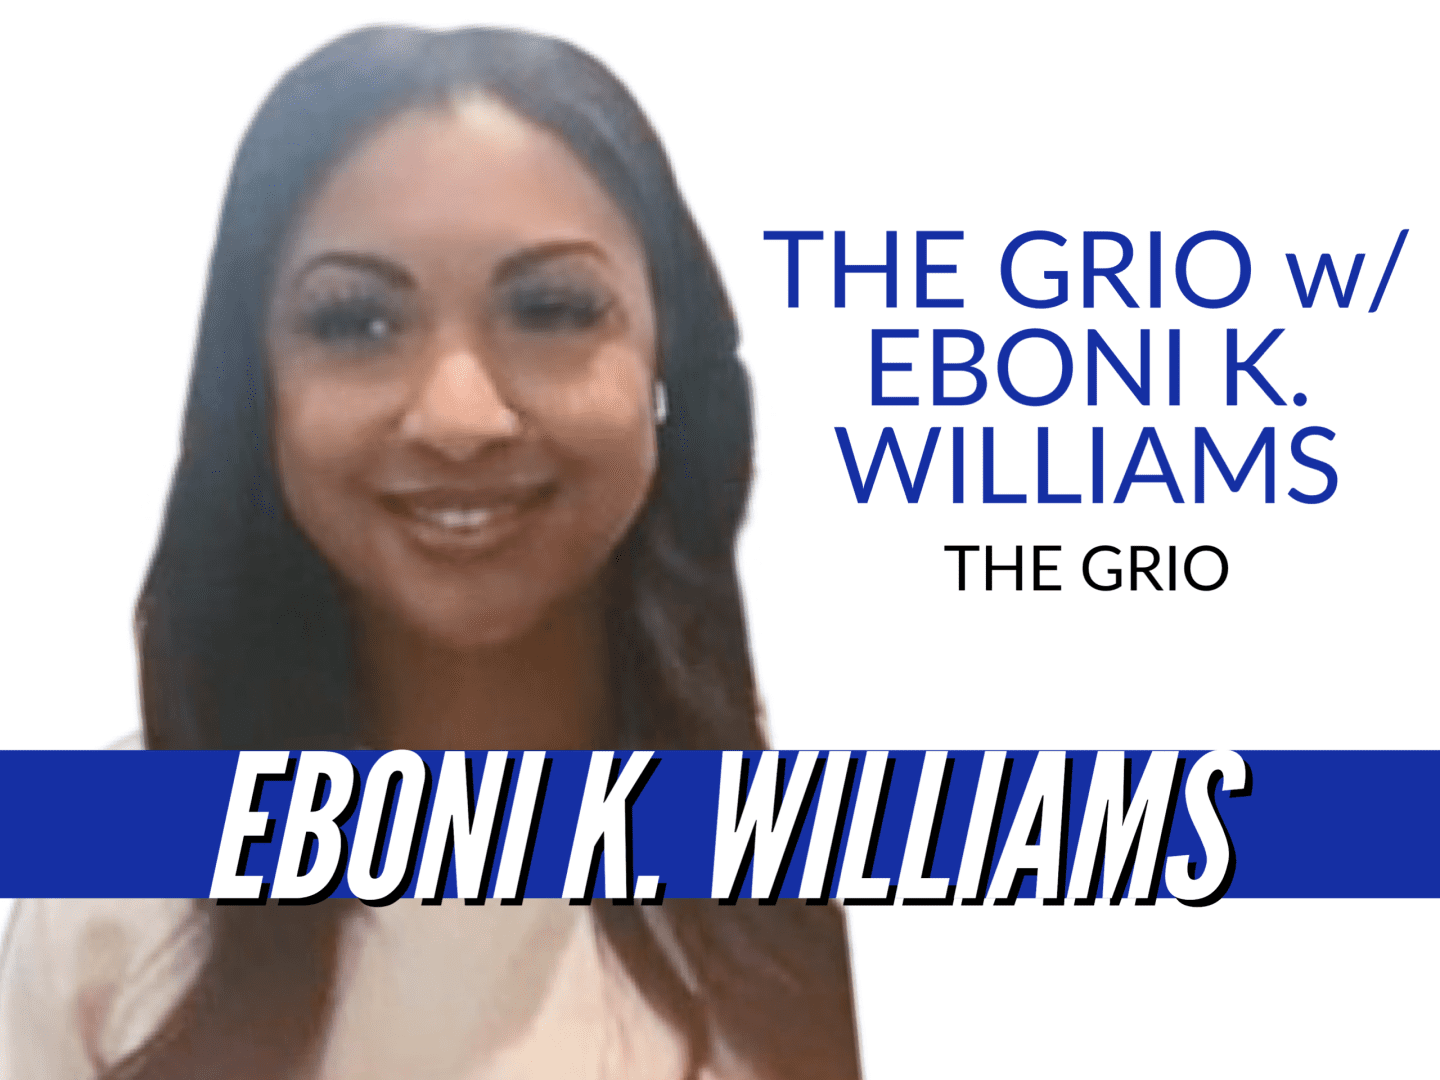 'The Grio With Eboni K. Williams' is bringing critical news to the culture